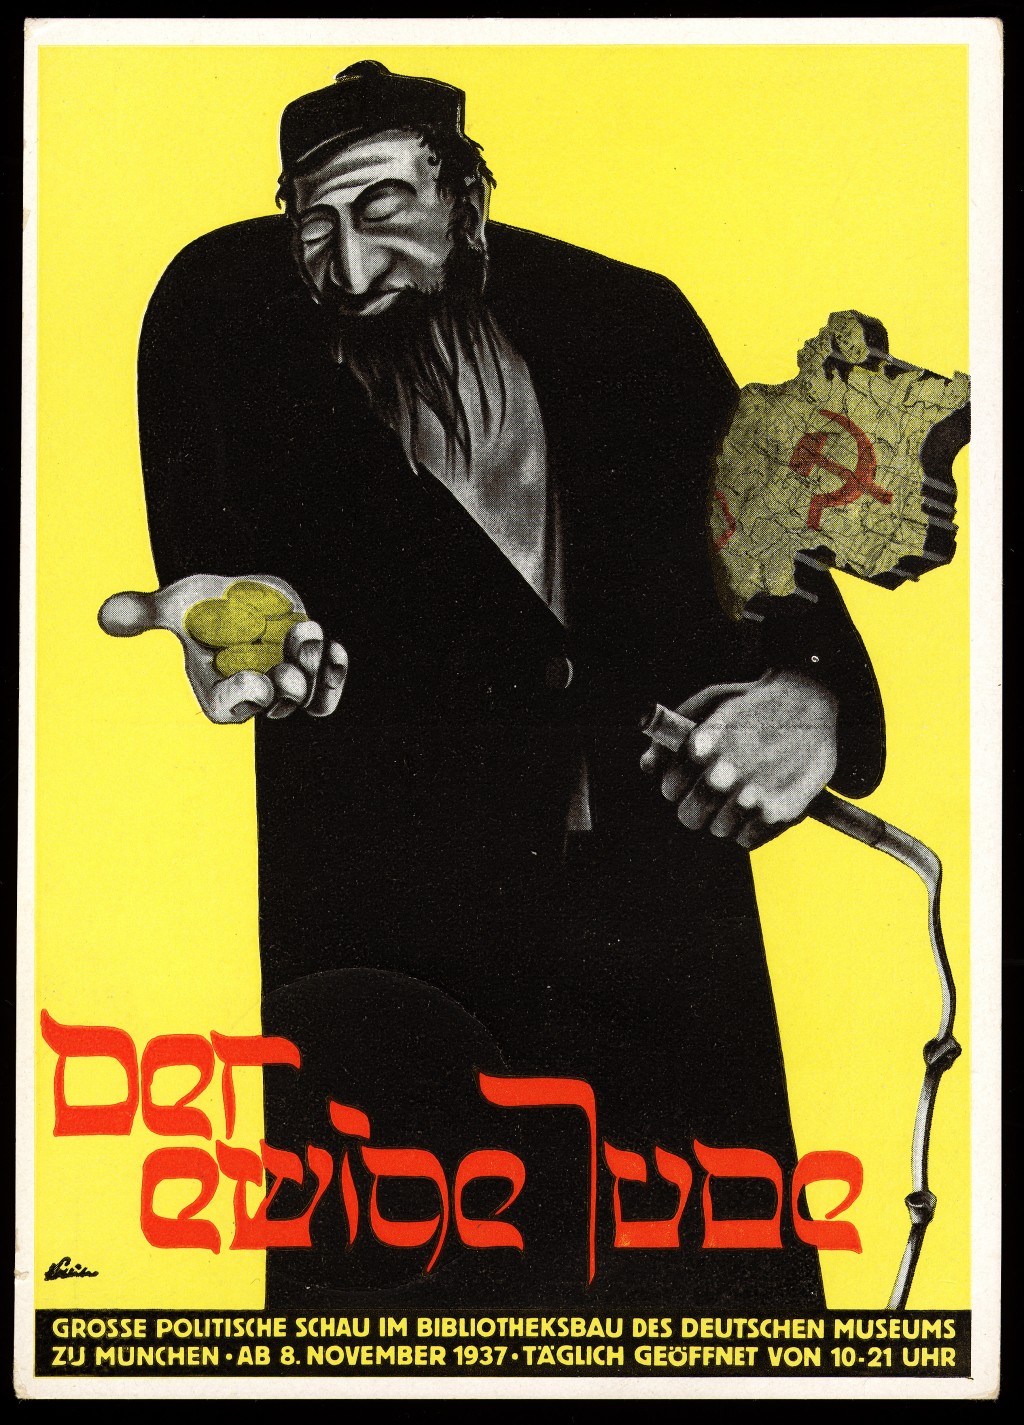 Poster for the antisemitic museum exhibition "Der ewige Jude" (The Eternal Jew) characterizes Jews as Marxists, moneylenders, and ... [LCID: 10651]